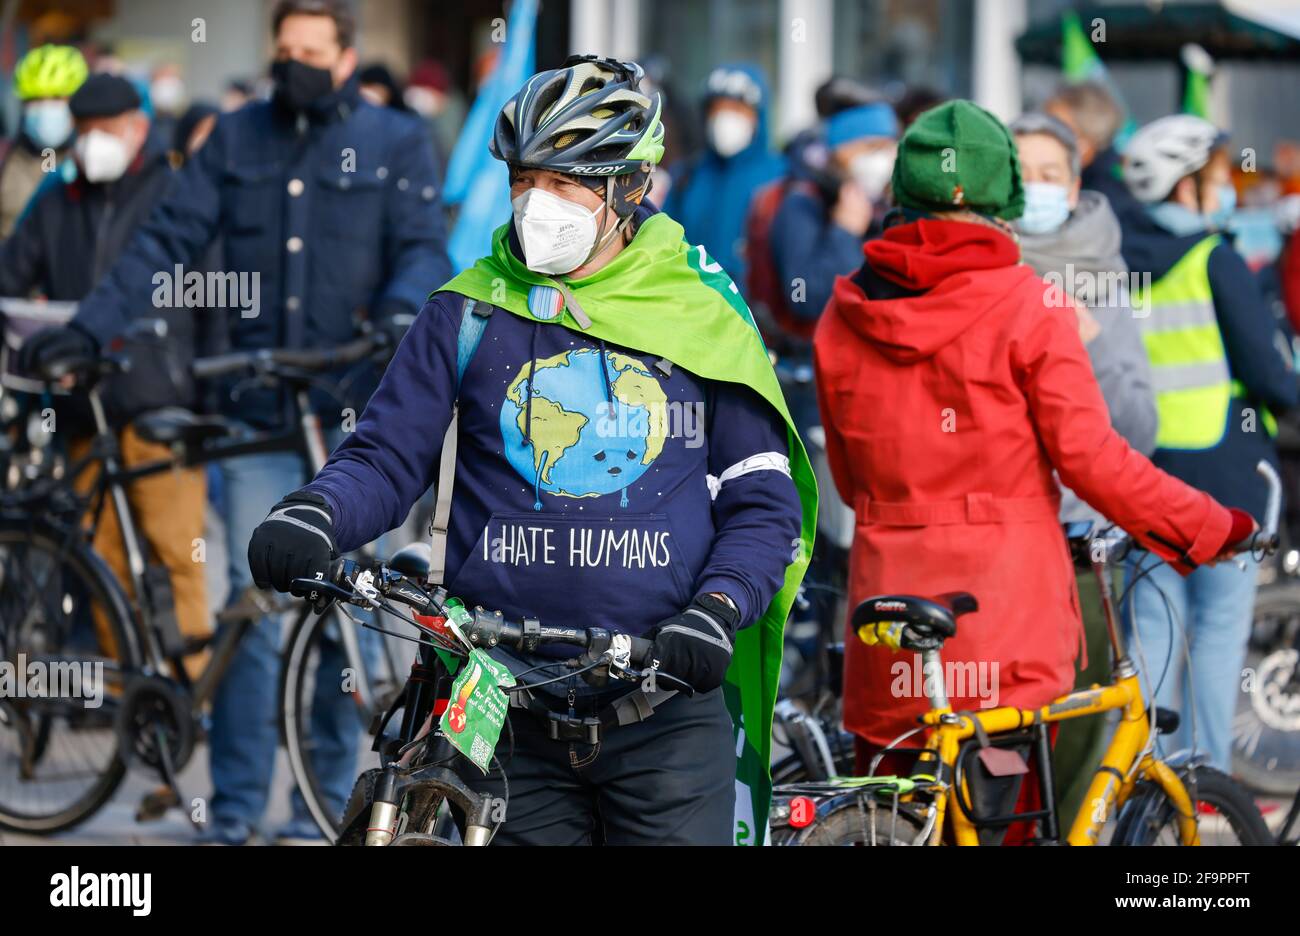 19.03.2021, Essen, North Rhine-Westphalia, Germany - Fridays for Future, climate activists demonstrate in times of the Corona Pandemic corona conform Stock Photo